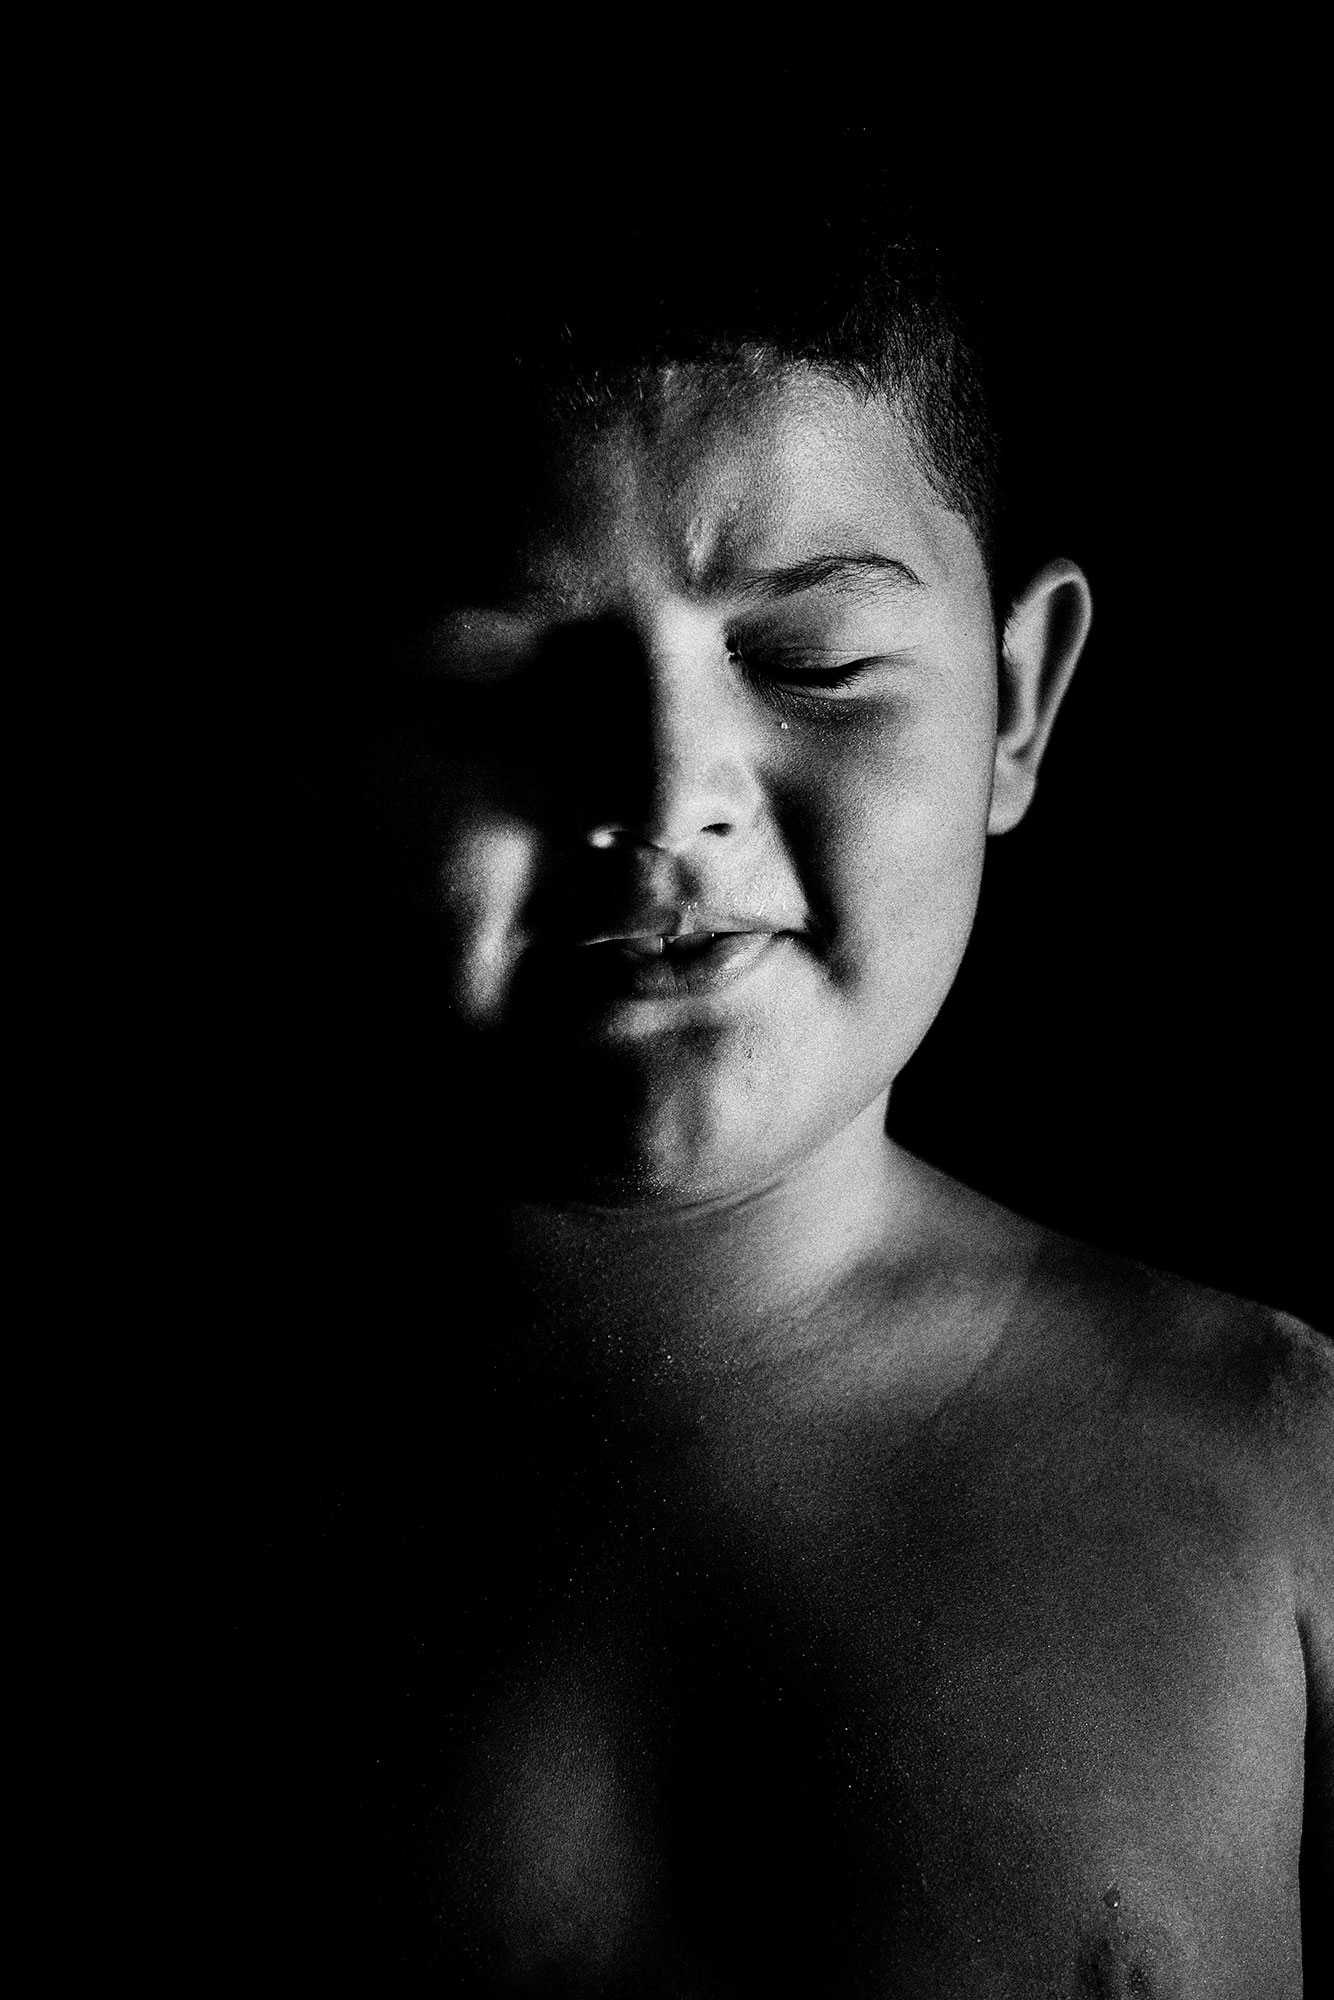 Eyes Closed Portrait of a Child from Ilha dos Lençóis: Black and White Portrait Photography by Jean Tran and Élysée Lang